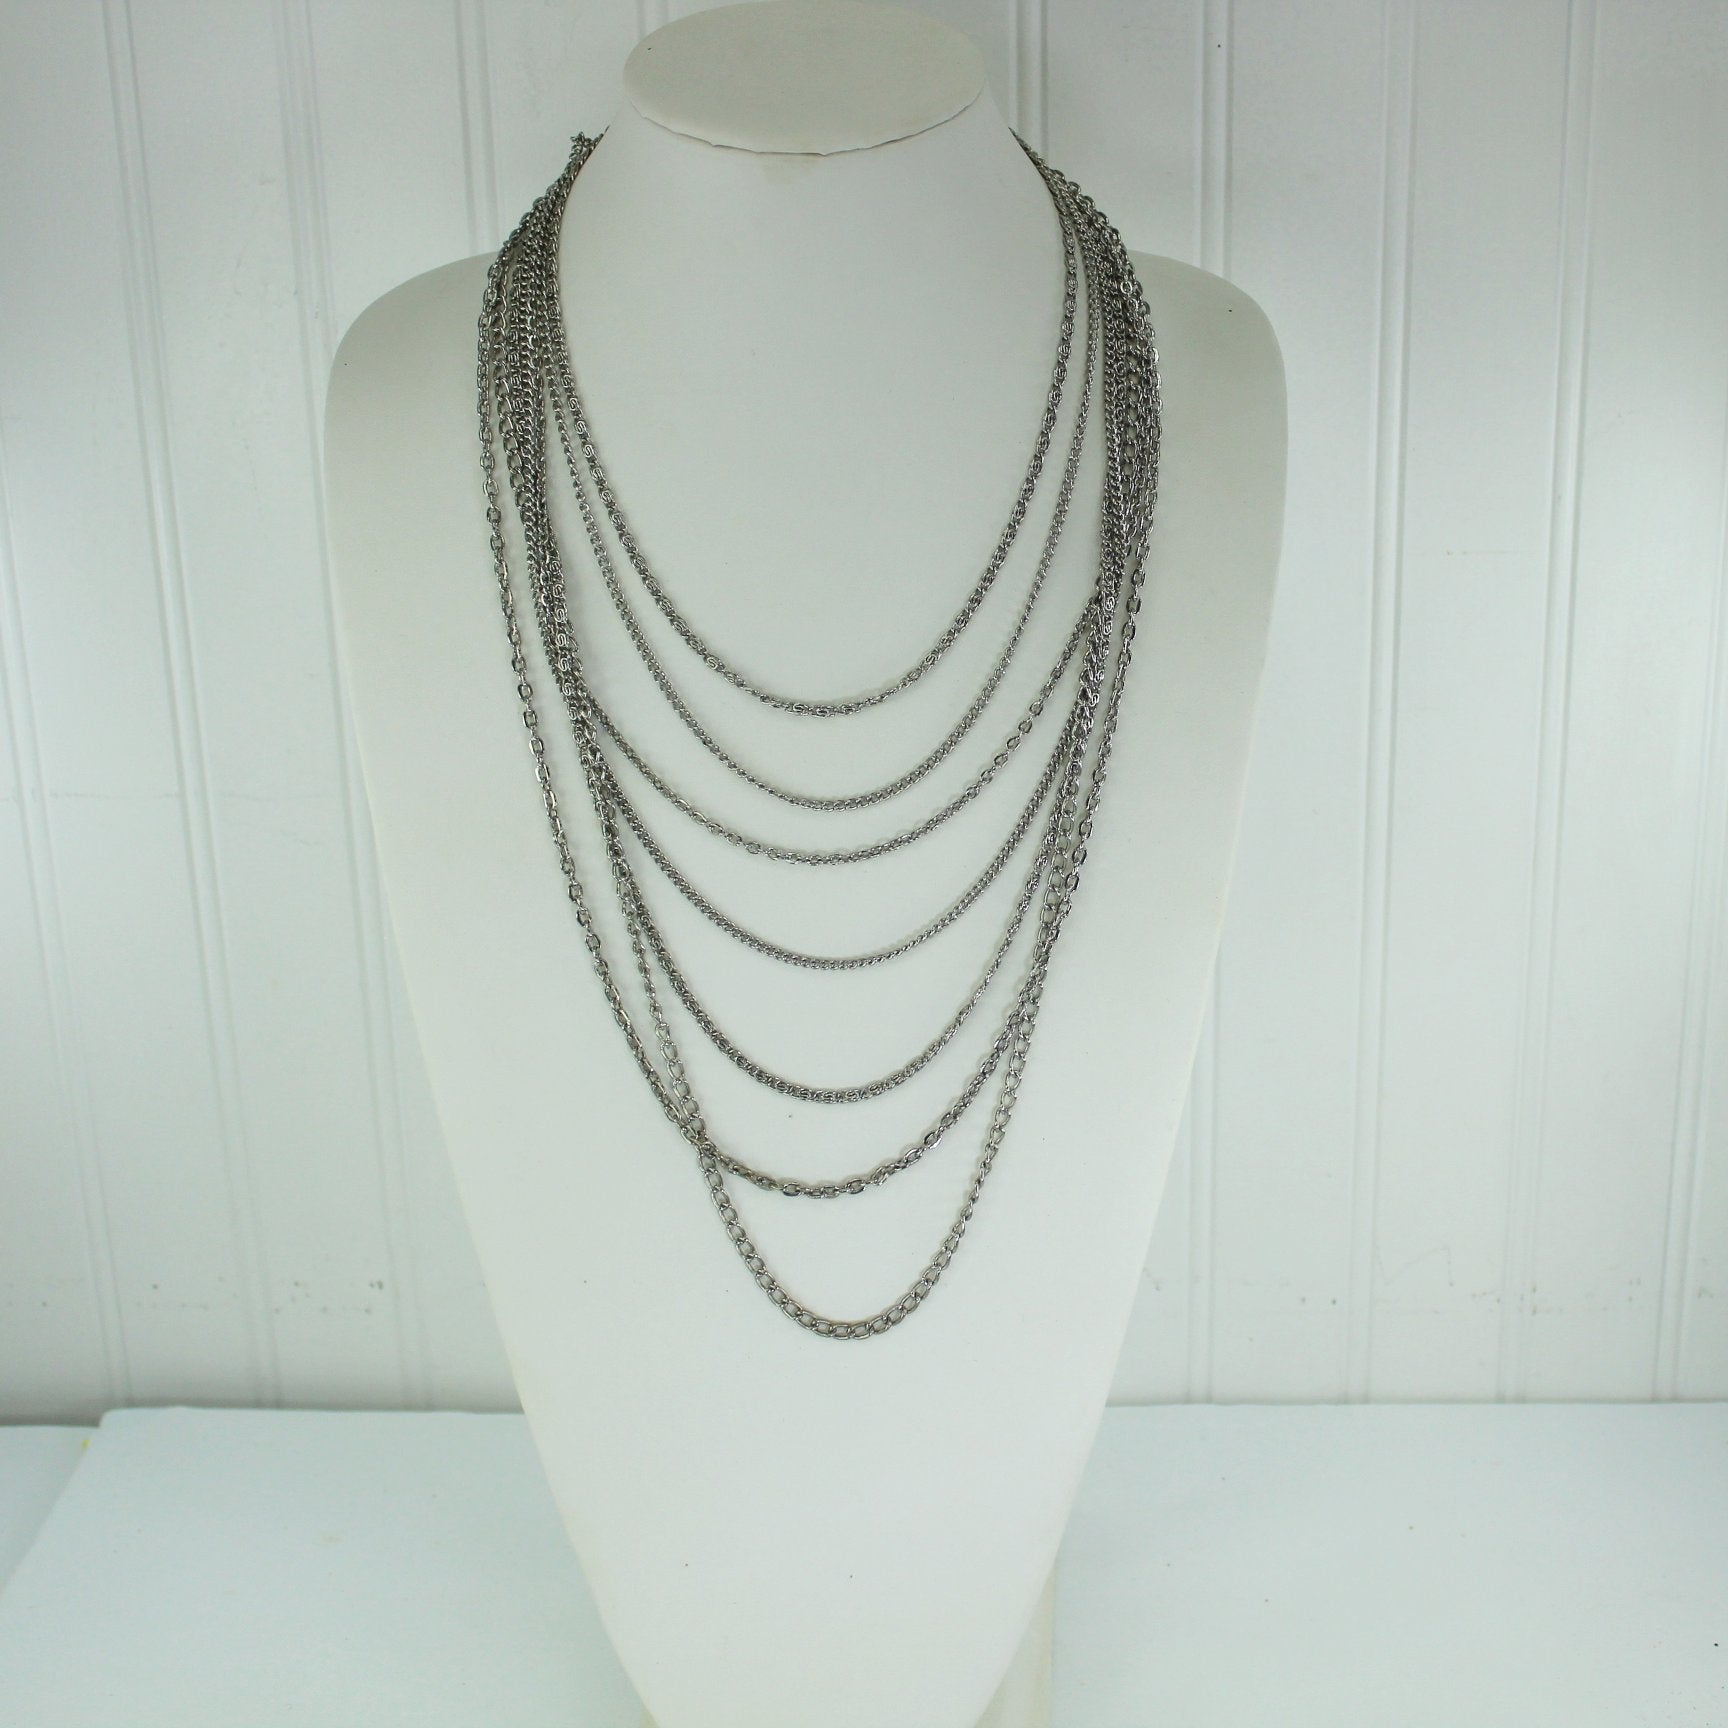 Vintage Necklace 7 Silver Chains Graduated Lengths Large Silver Clasp on neck